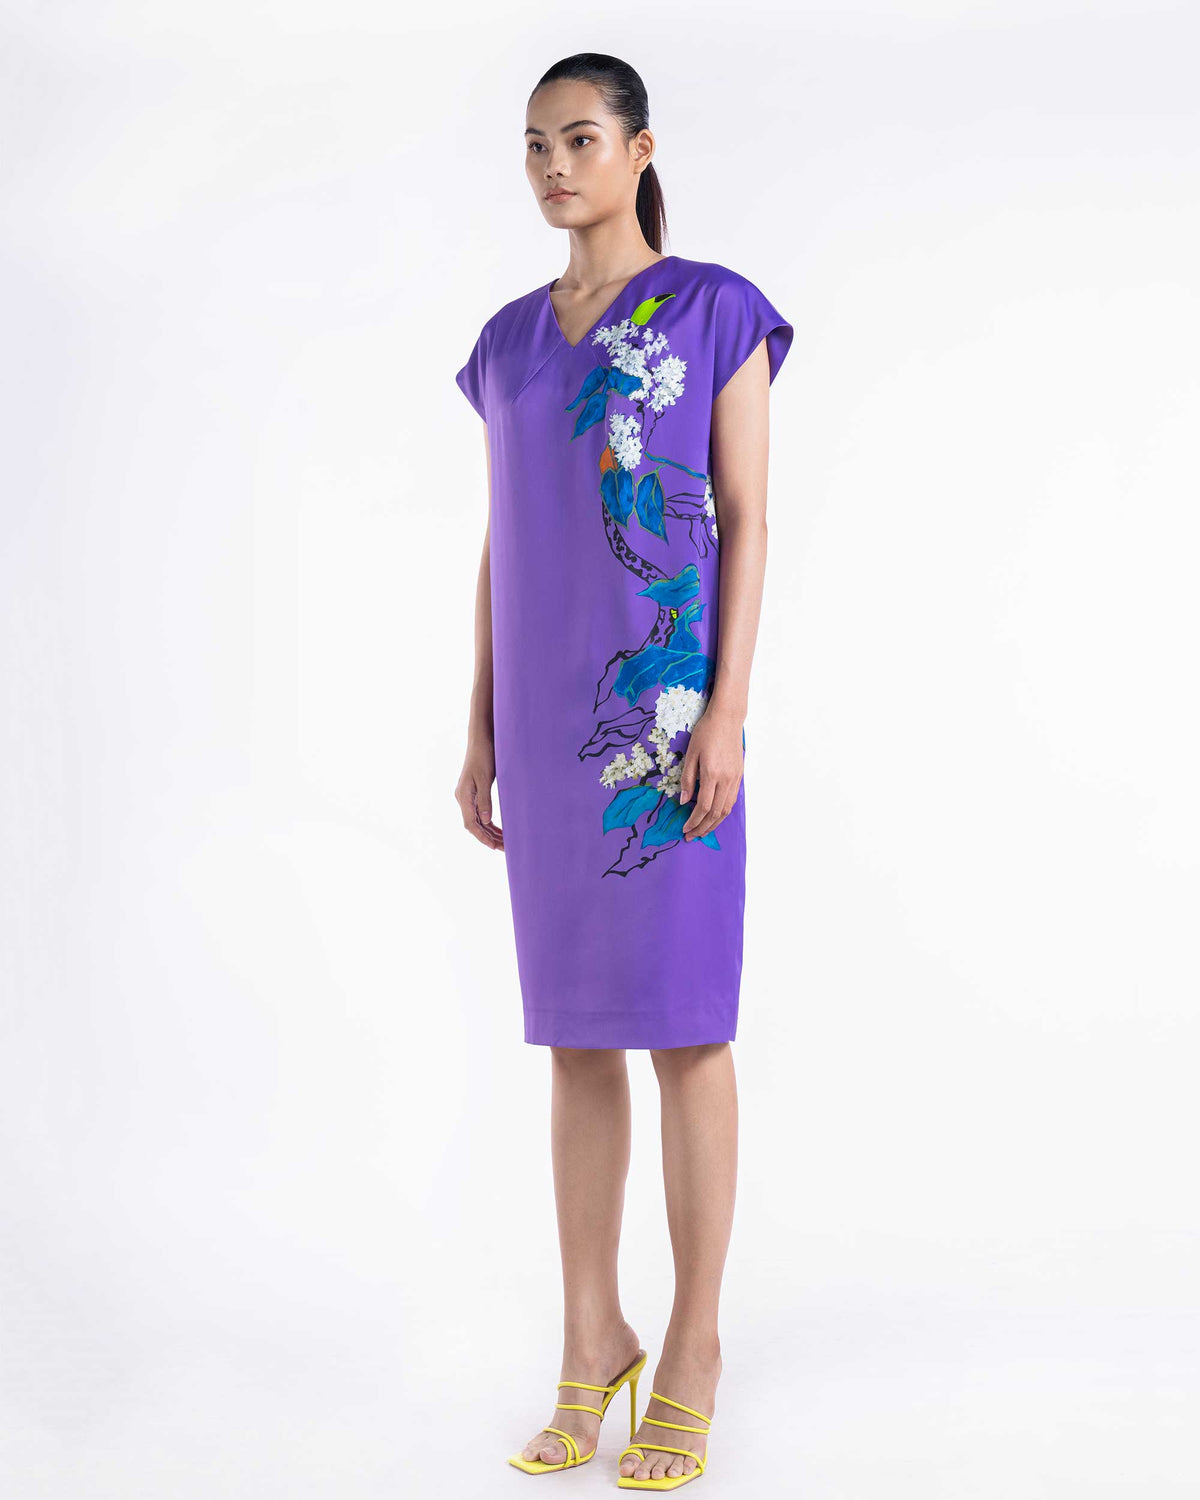 Behind the Lilac Clump - V-neck Purple Cocoon Dress